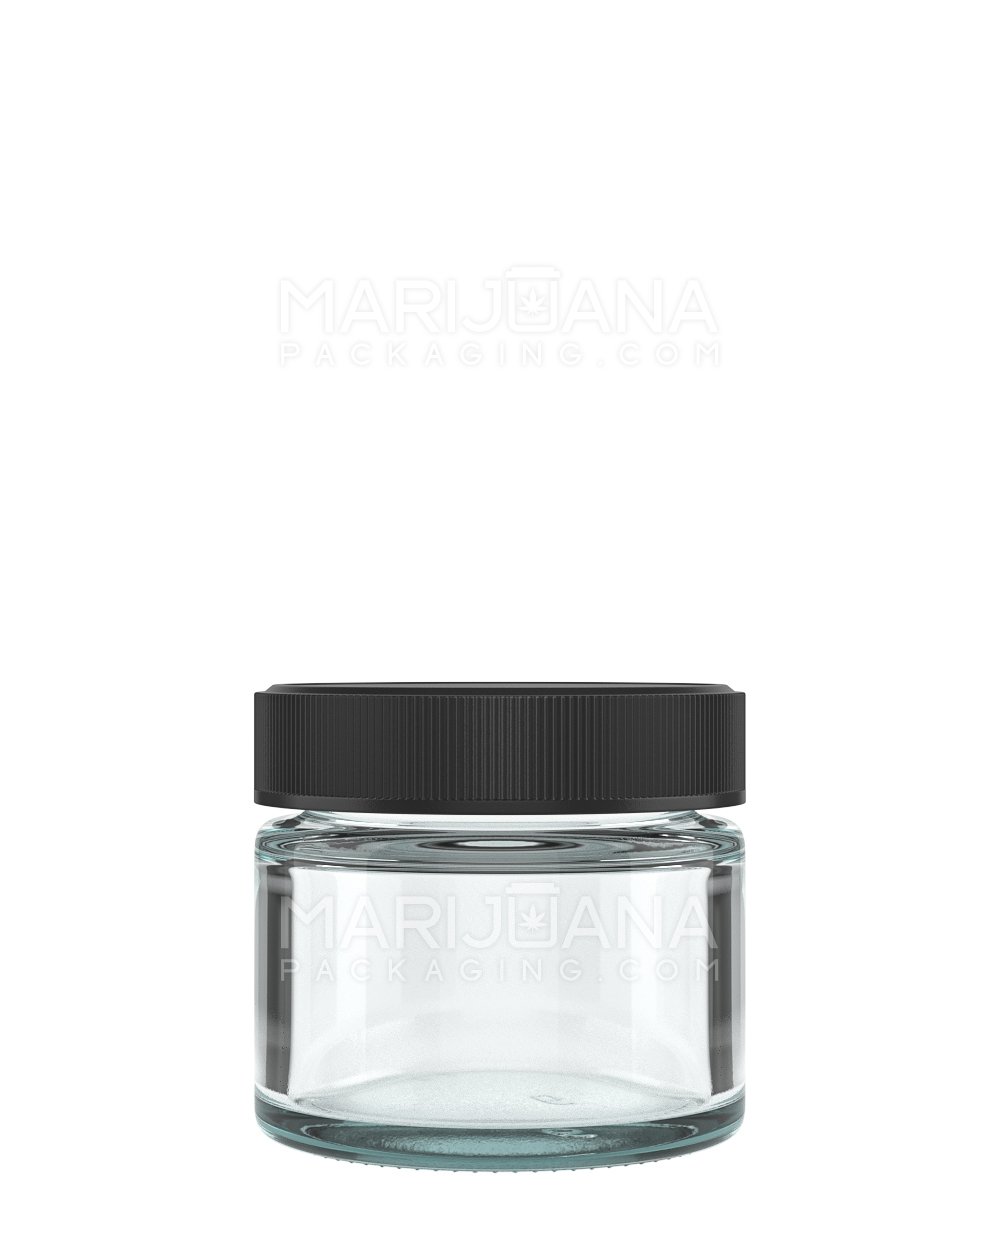 Straight Sided Clear Glass Jars with Black Cap | 53mm - 2oz | Sample - 1